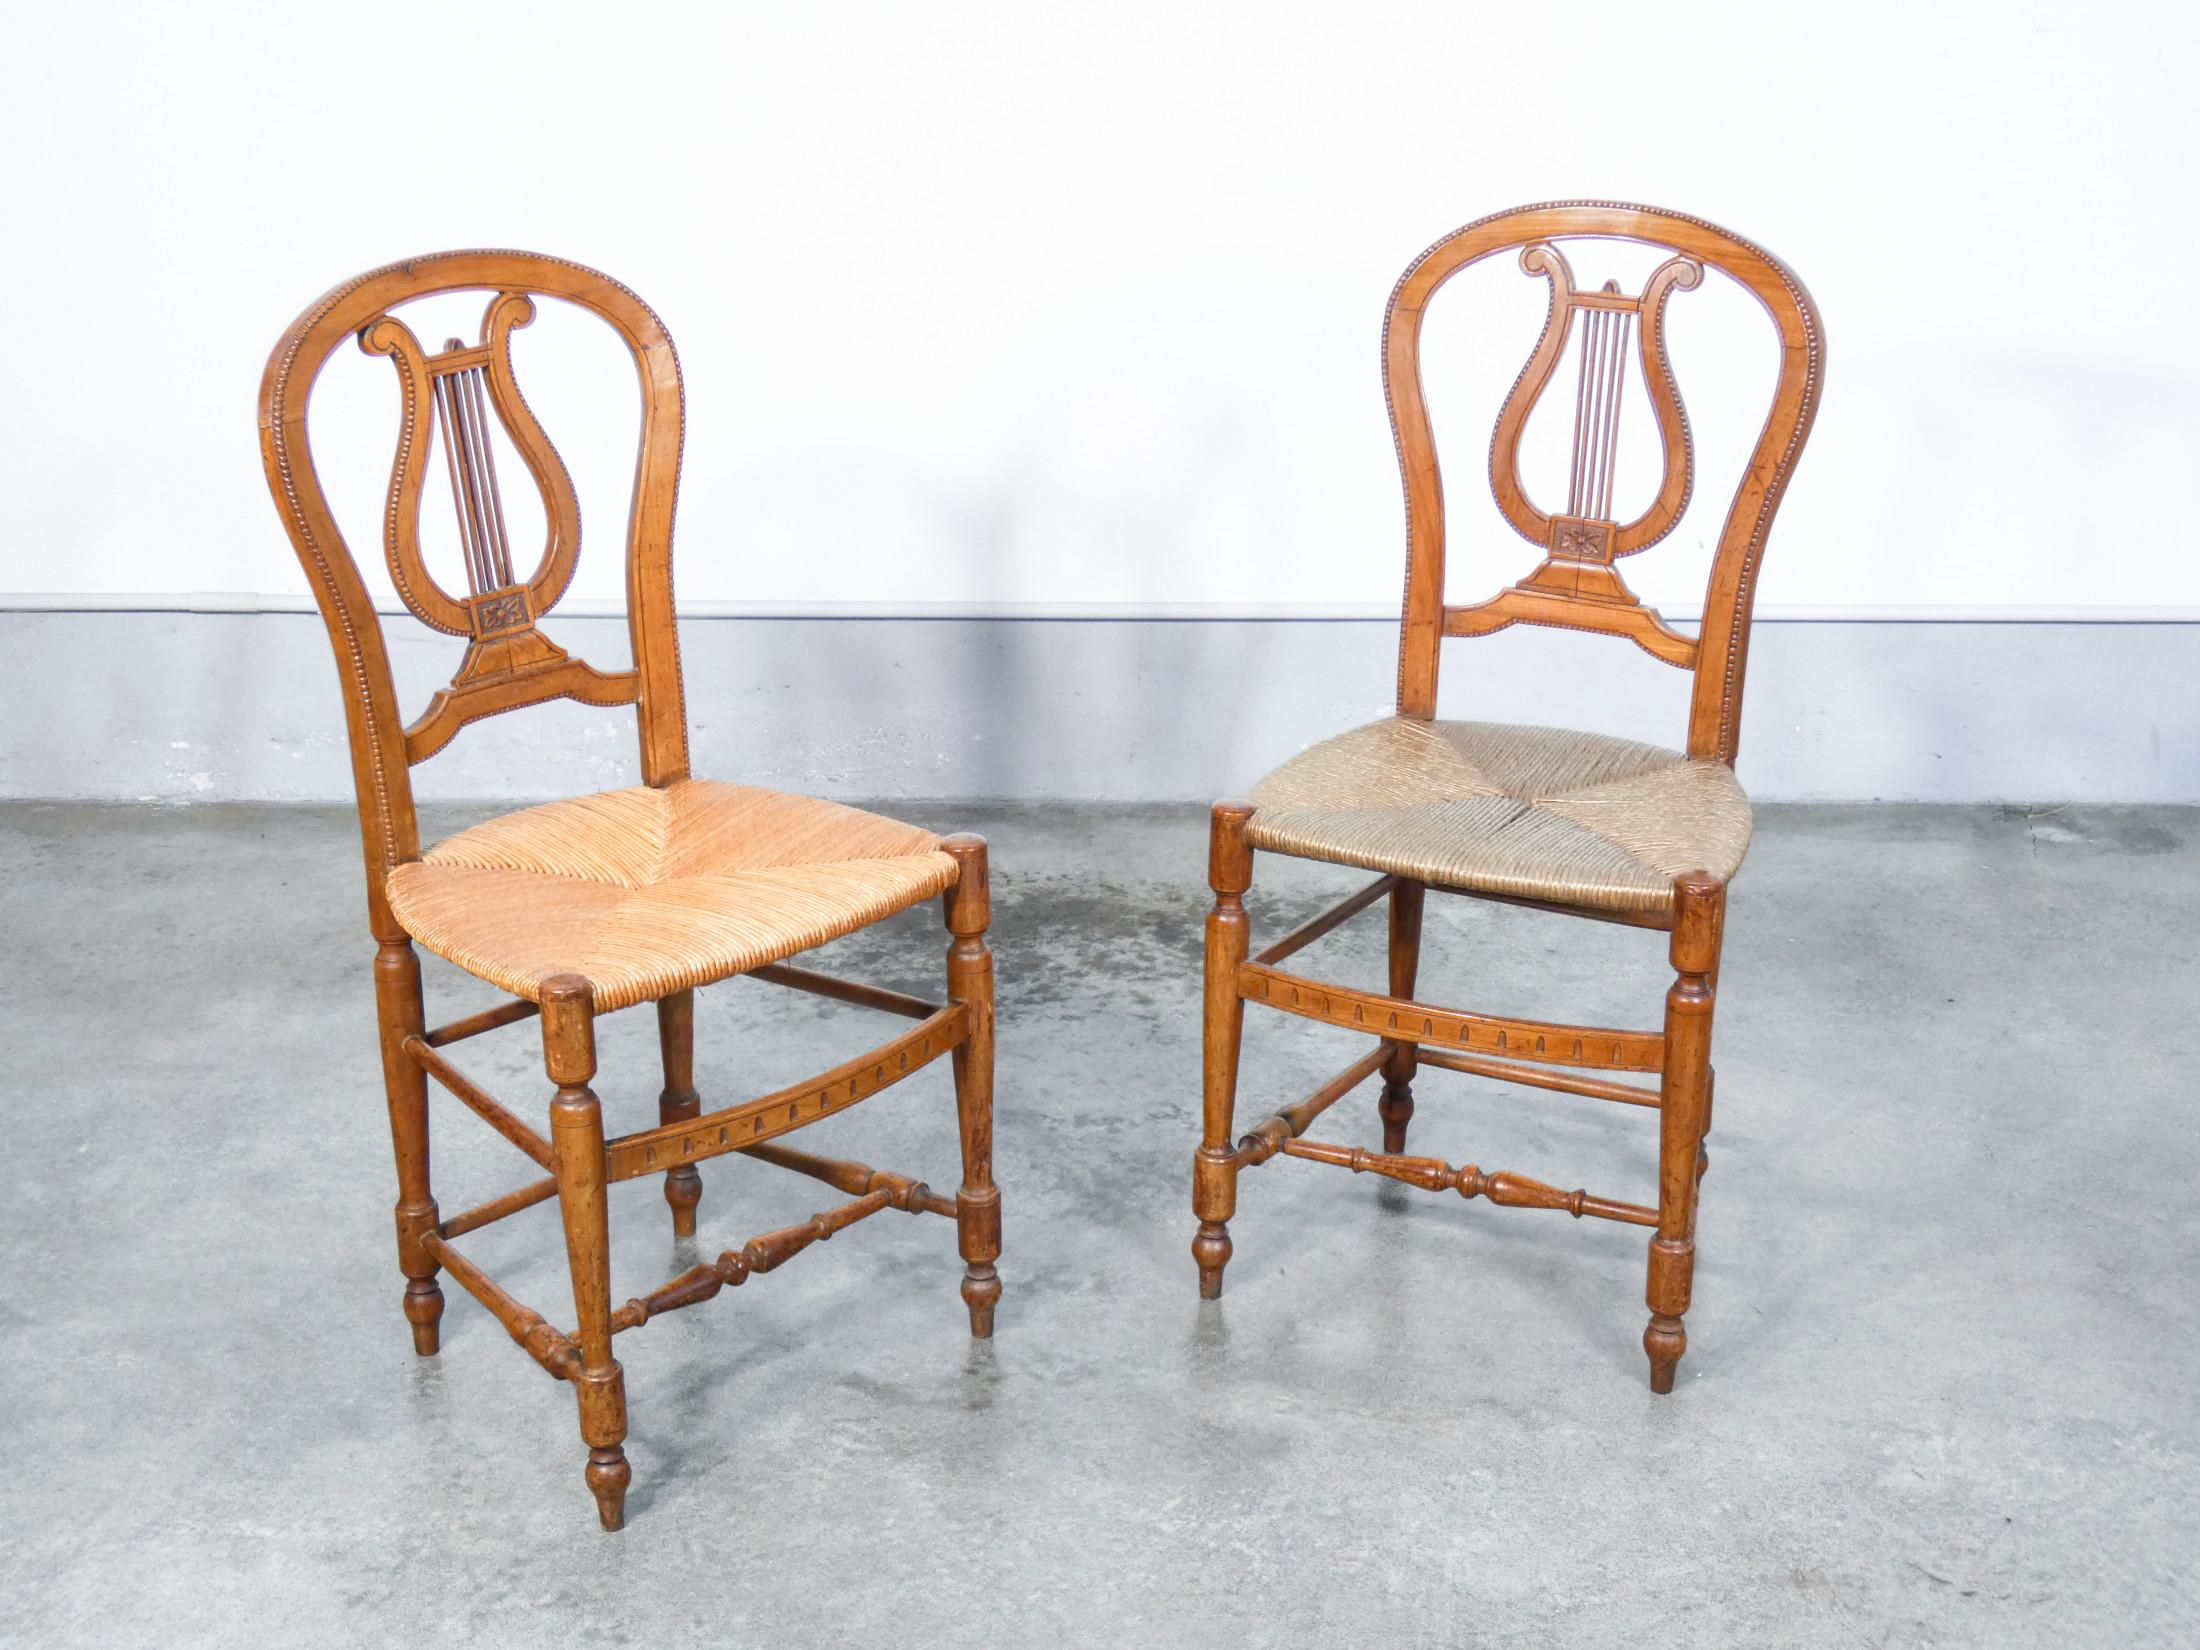 Pair of cherry wood chairs with lyre-shaped back and straw seat

Origin
Italy

Period
Very early twentieth century

Materials
Solid carved cherry wood. Straw seats

Dimensions
Height: 91.5 cm
Width: 44 cm
Depth: 45.5 cm
Seat: 45